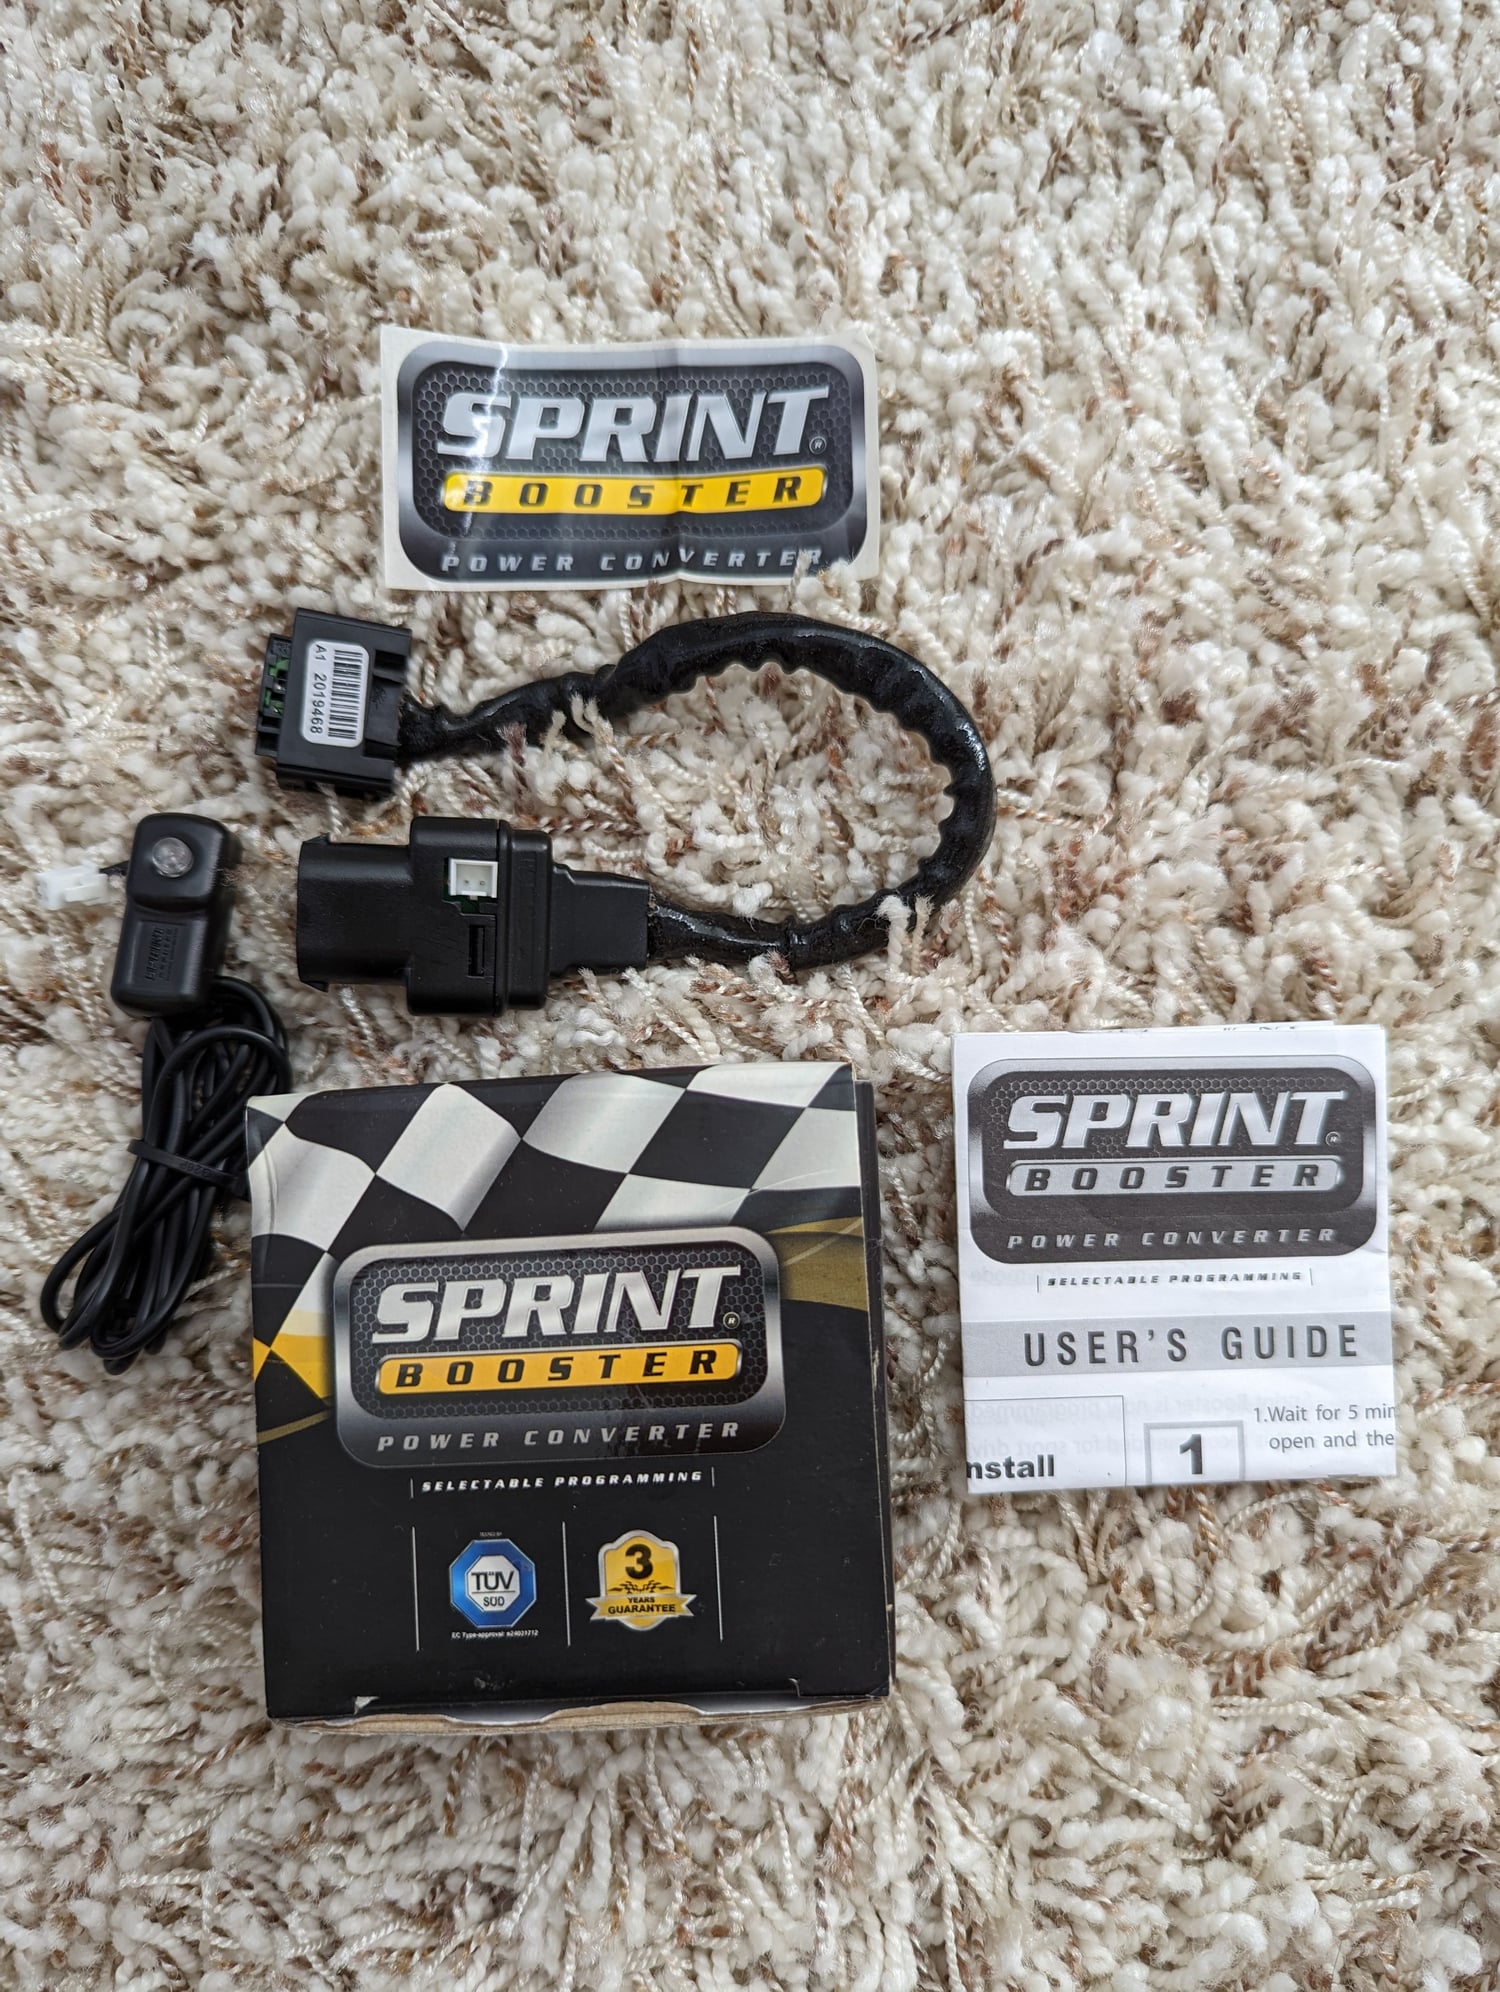 Accessories - Sprint Booster V2 SBME0002 for C, E, S, CLS, CLK, G, CL, GL, SL, M Class - Used - 0  All Models - San Gabriel Valley / Los Angeles, CA 91722, United States